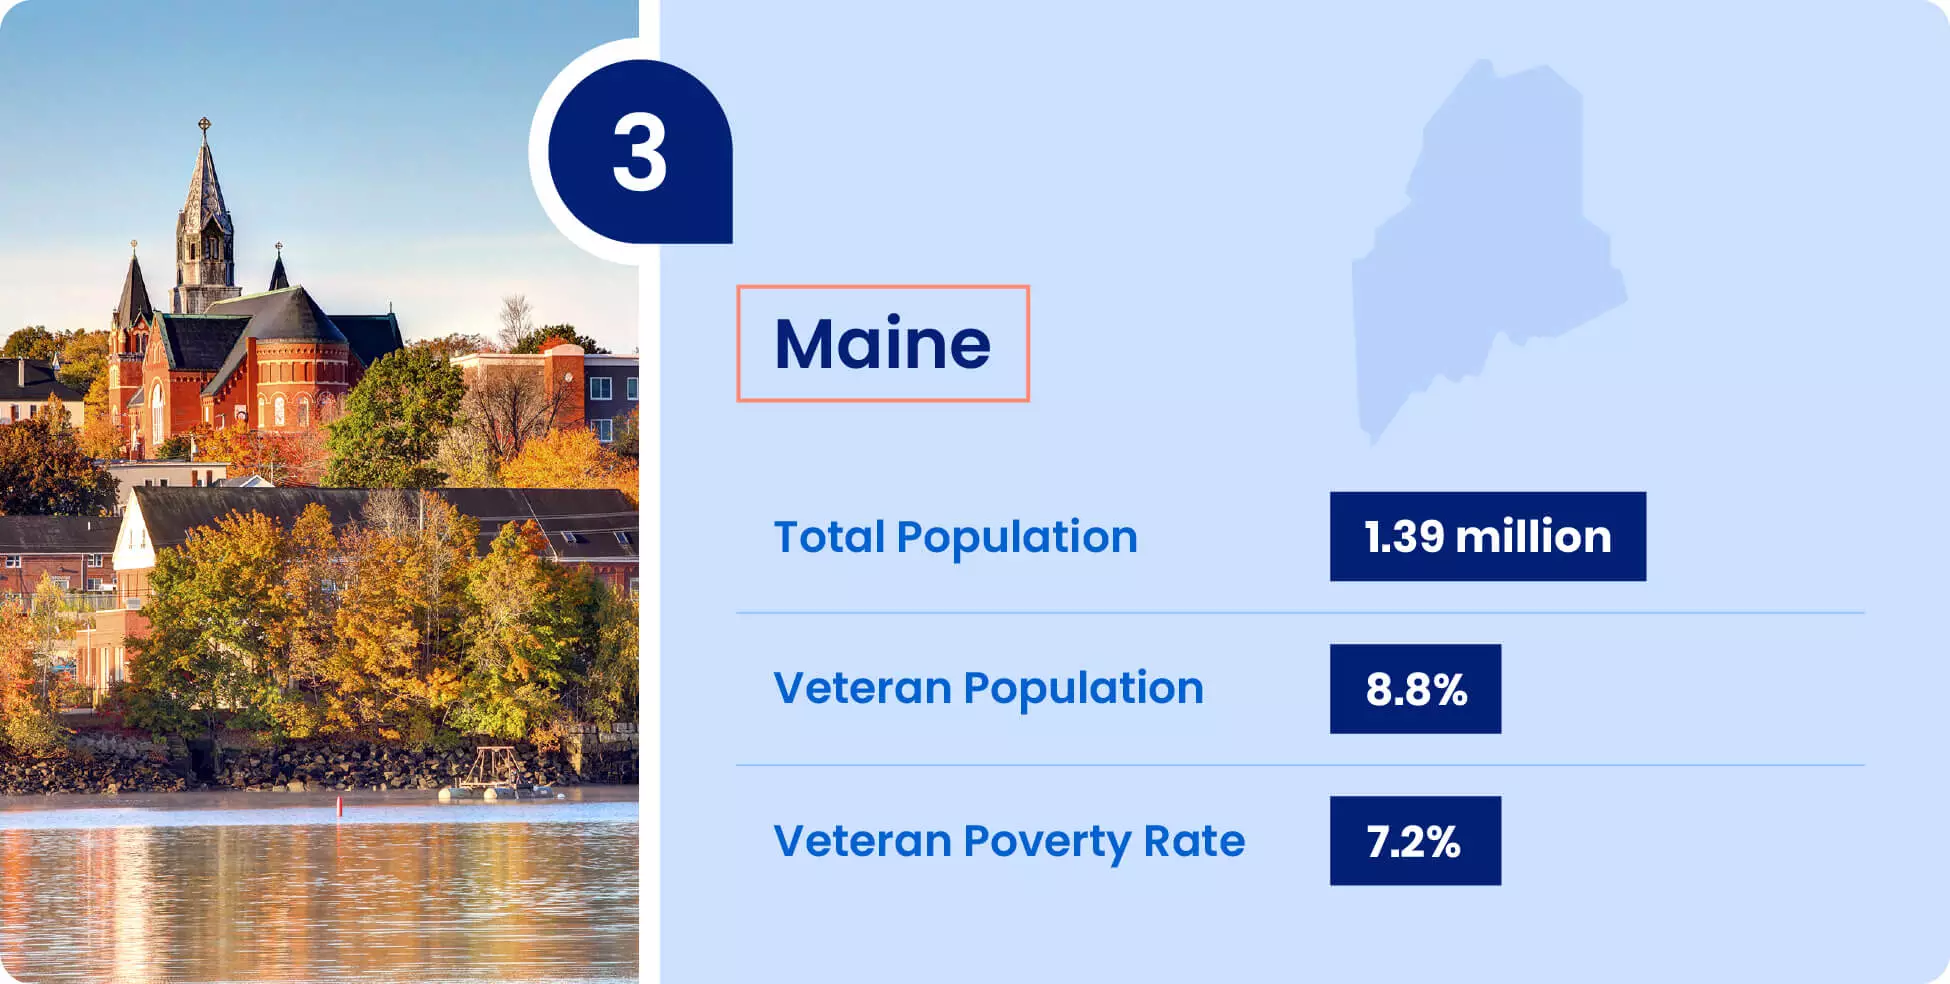 Image shows key information for military retirees thinking of moving to Maine.